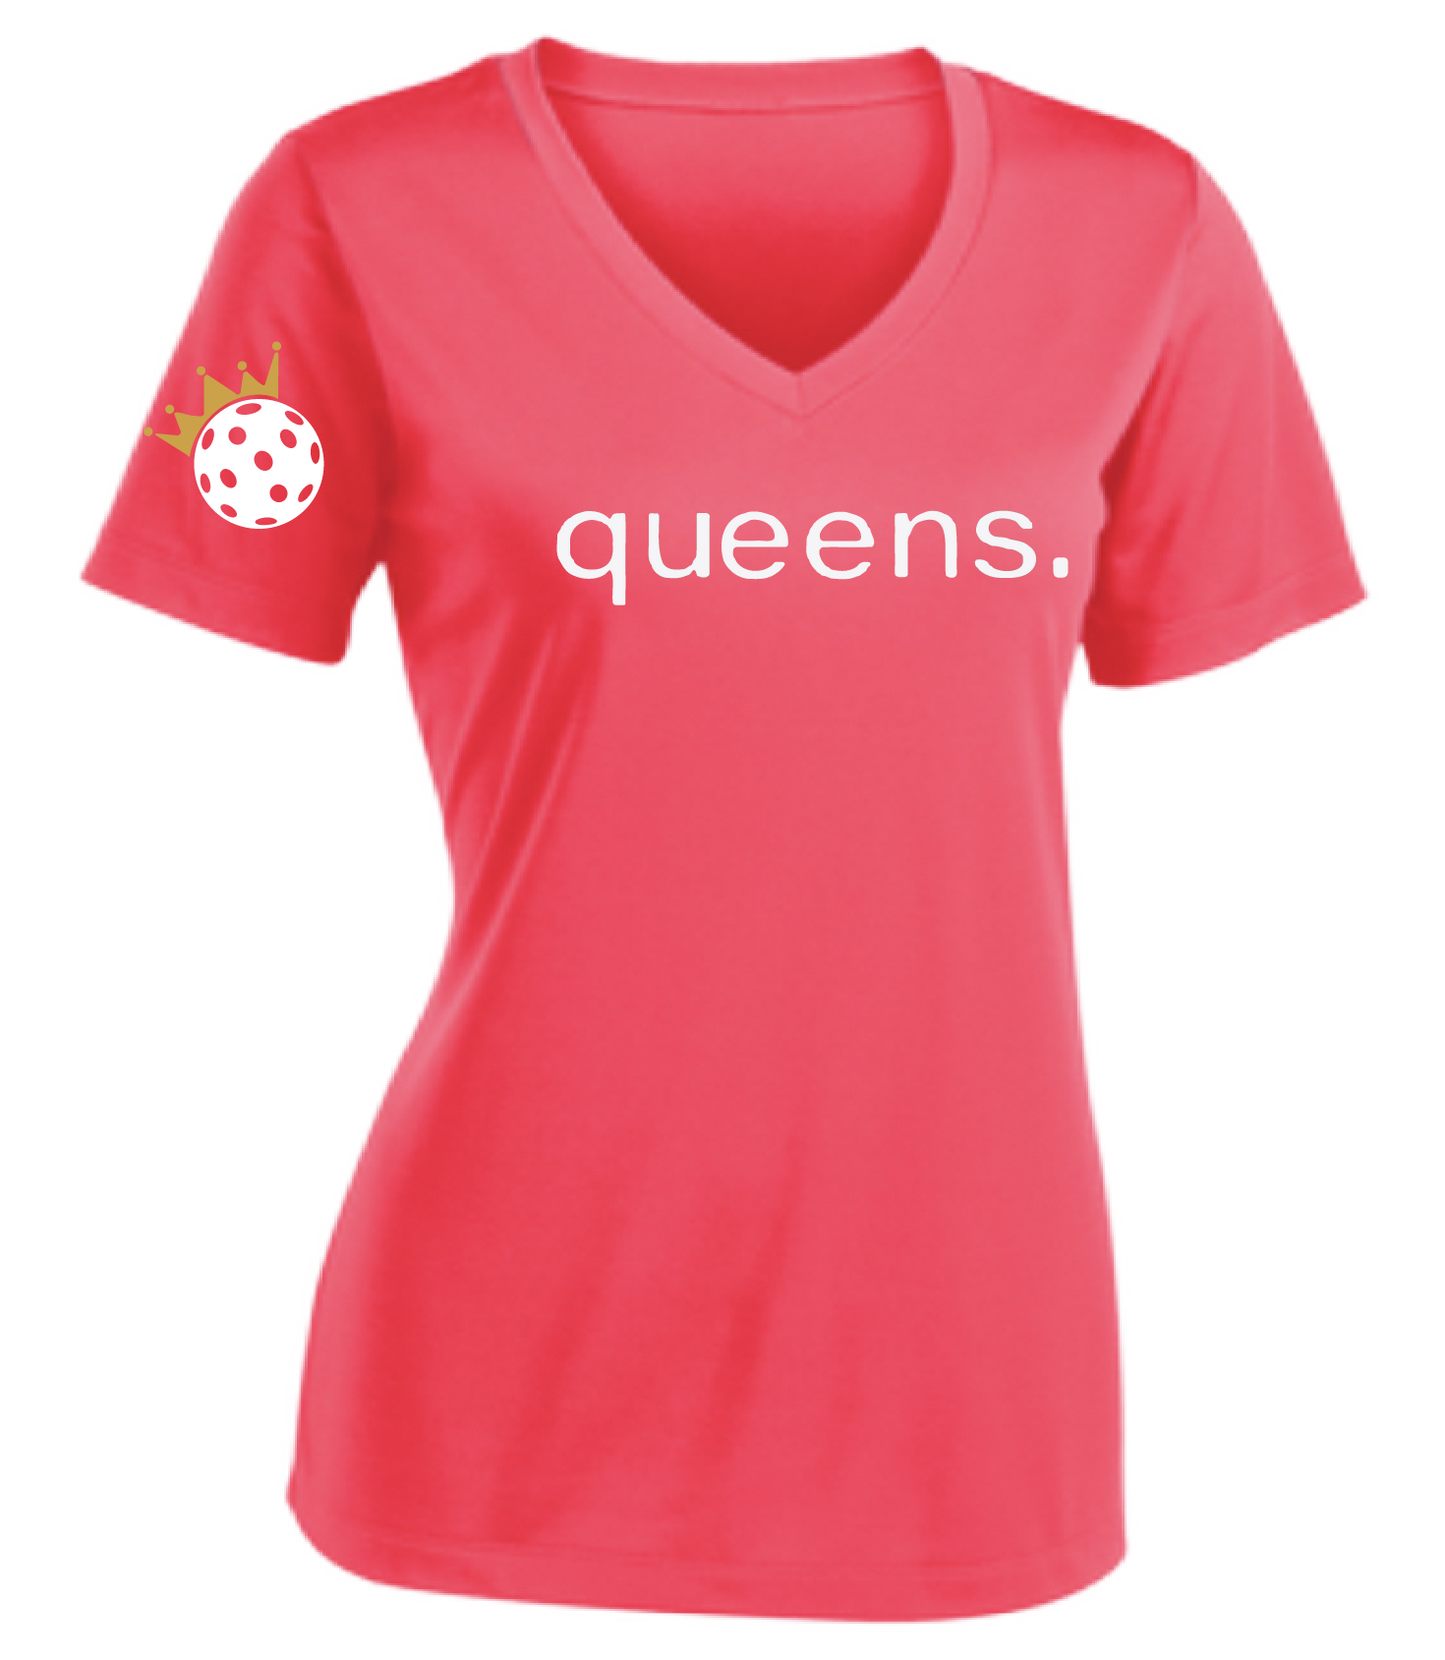 Design: Pickleball Queen and Crown  This Women's Short Sleeve V-Neck shirt from Pickleball Queen and Crown Design is the perfect combination of comfort and style. Made with a tri-blend of ultra-soft materials, it features moisture-wicking properties and PosiCharge technology for color-locking. Highly breathable and lightweight. It's designed to keep you cool and dry while you're active on the court, allowing you to play your best game.